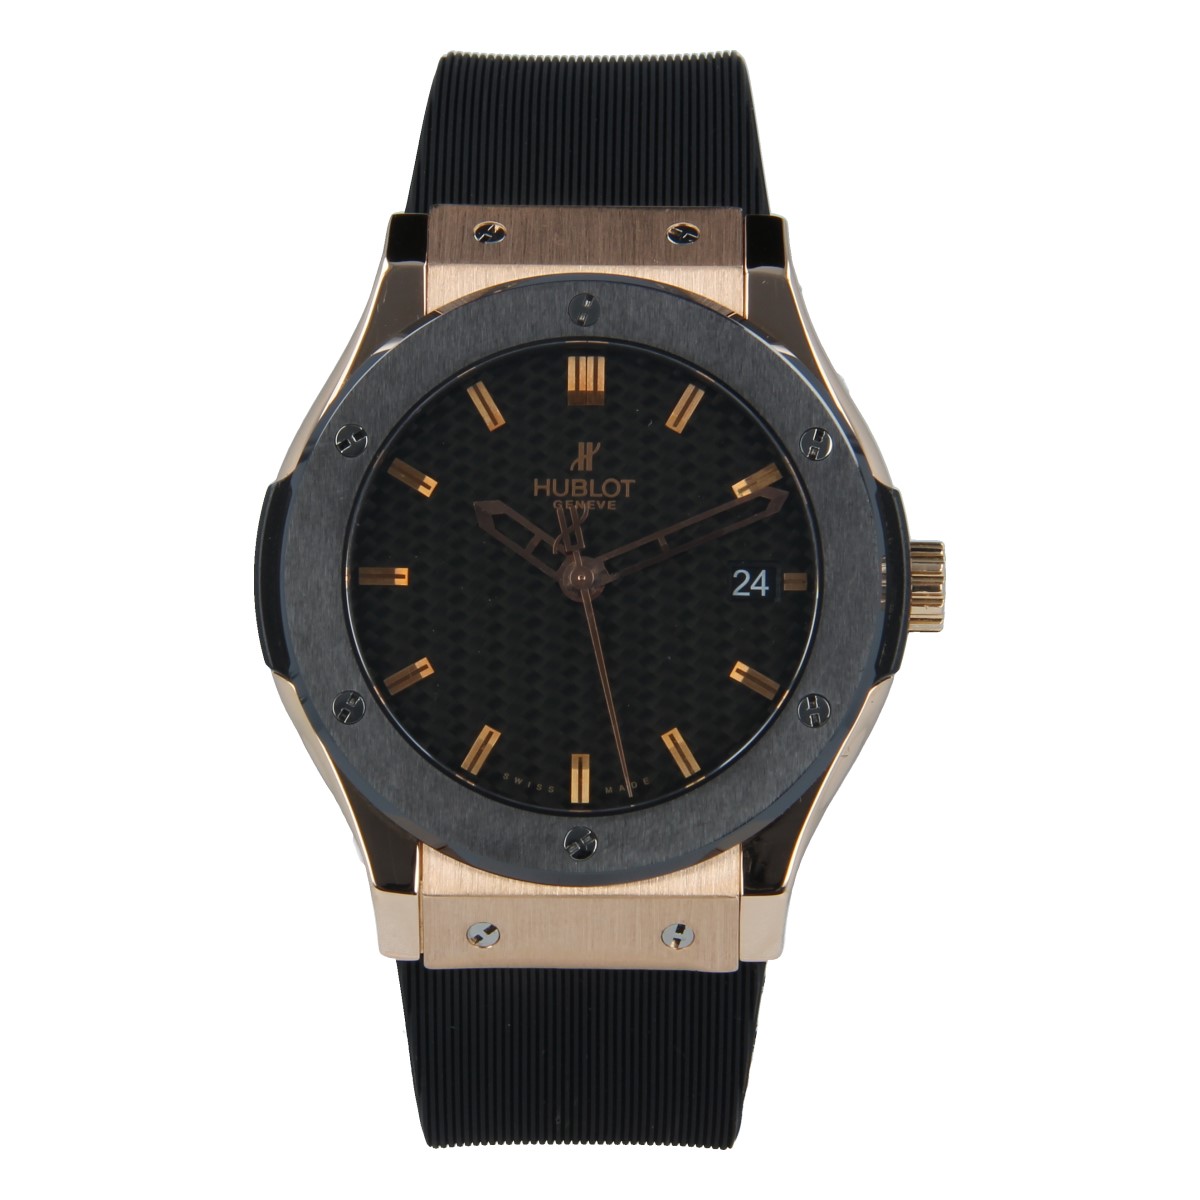 Hublot Classic Fusion 45mm Rose Gold | Buy pre-owned Hublot watch